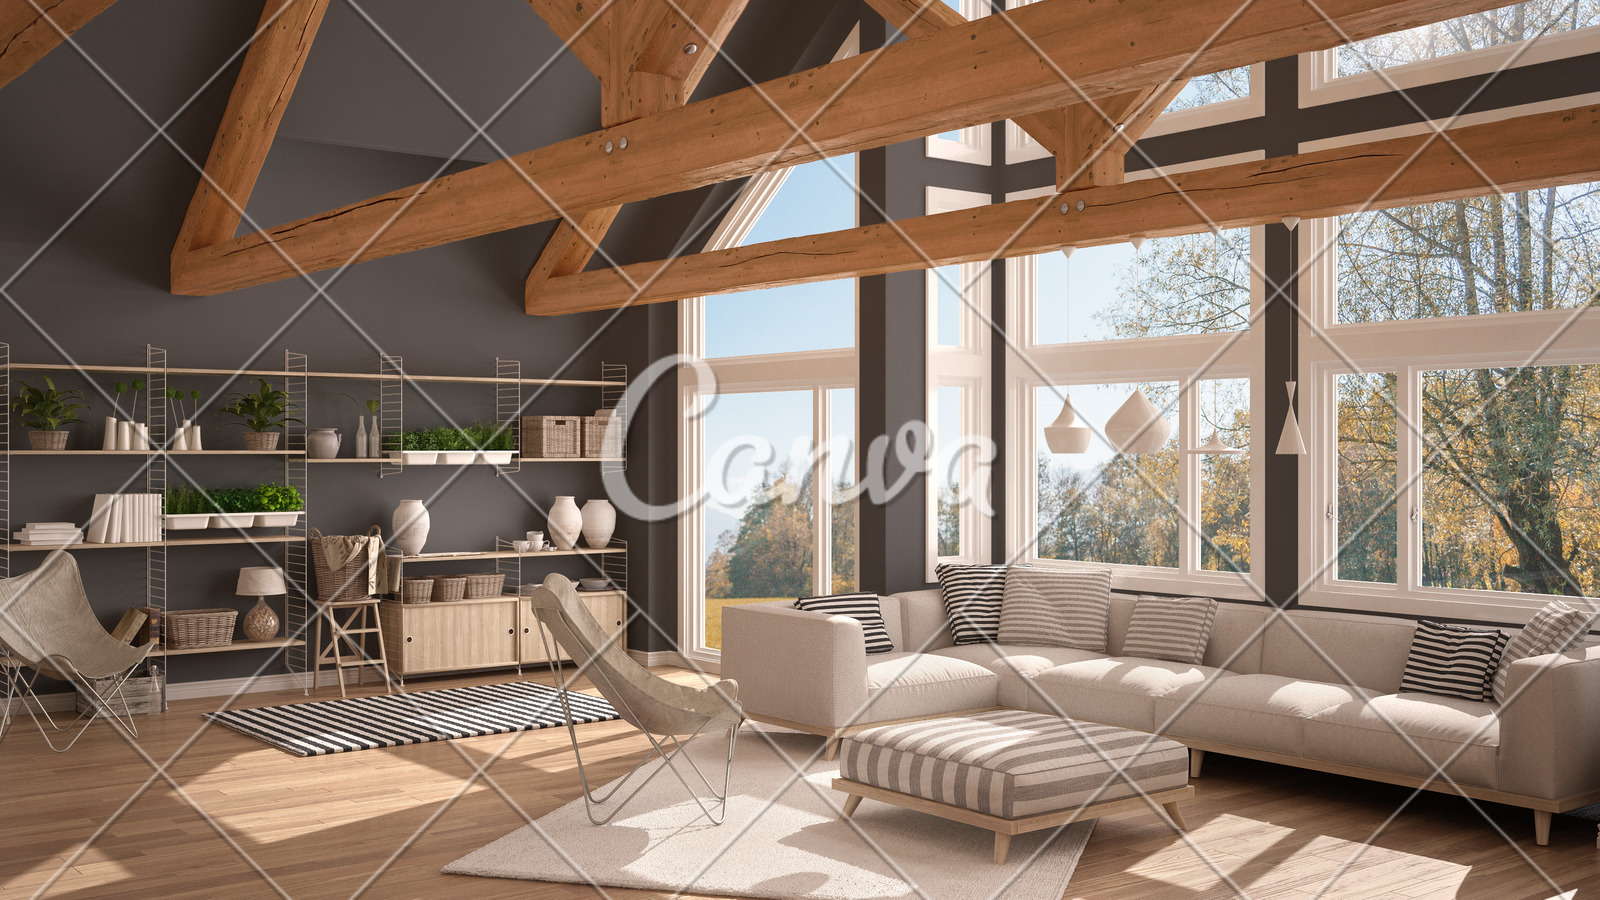 Living Room Of Luxury Eco House Parquet Floor And Wooden Roof